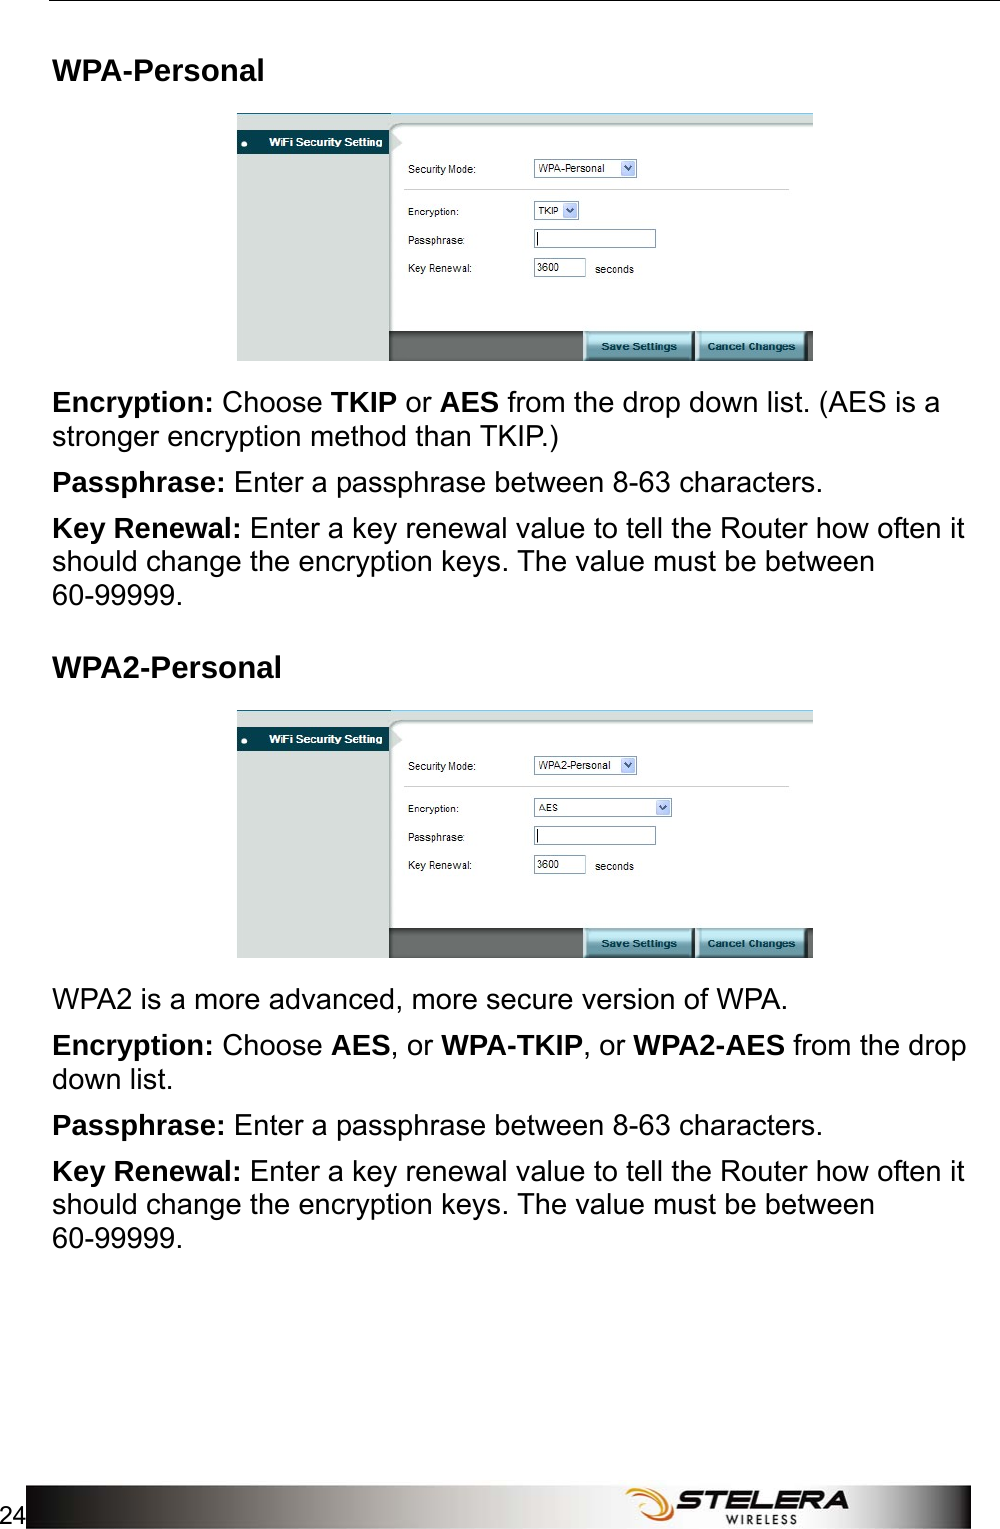 WiFi Setup 24   WPA-Personal  Encryption: Choose TKIP or AES from the drop down list. (AES is a stronger encryption method than TKIP.) Passphrase: Enter a passphrase between 8-63 characters. Key Renewal: Enter a key renewal value to tell the Router how often it should change the encryption keys. The value must be between 60-99999. WPA2-Personal  WPA2 is a more advanced, more secure version of WPA.   Encryption: Choose AES, or WPA-TKIP, or WPA2-AES from the drop down list. Passphrase: Enter a passphrase between 8-63 characters. Key Renewal: Enter a key renewal value to tell the Router how often it should change the encryption keys. The value must be between 60-99999. 